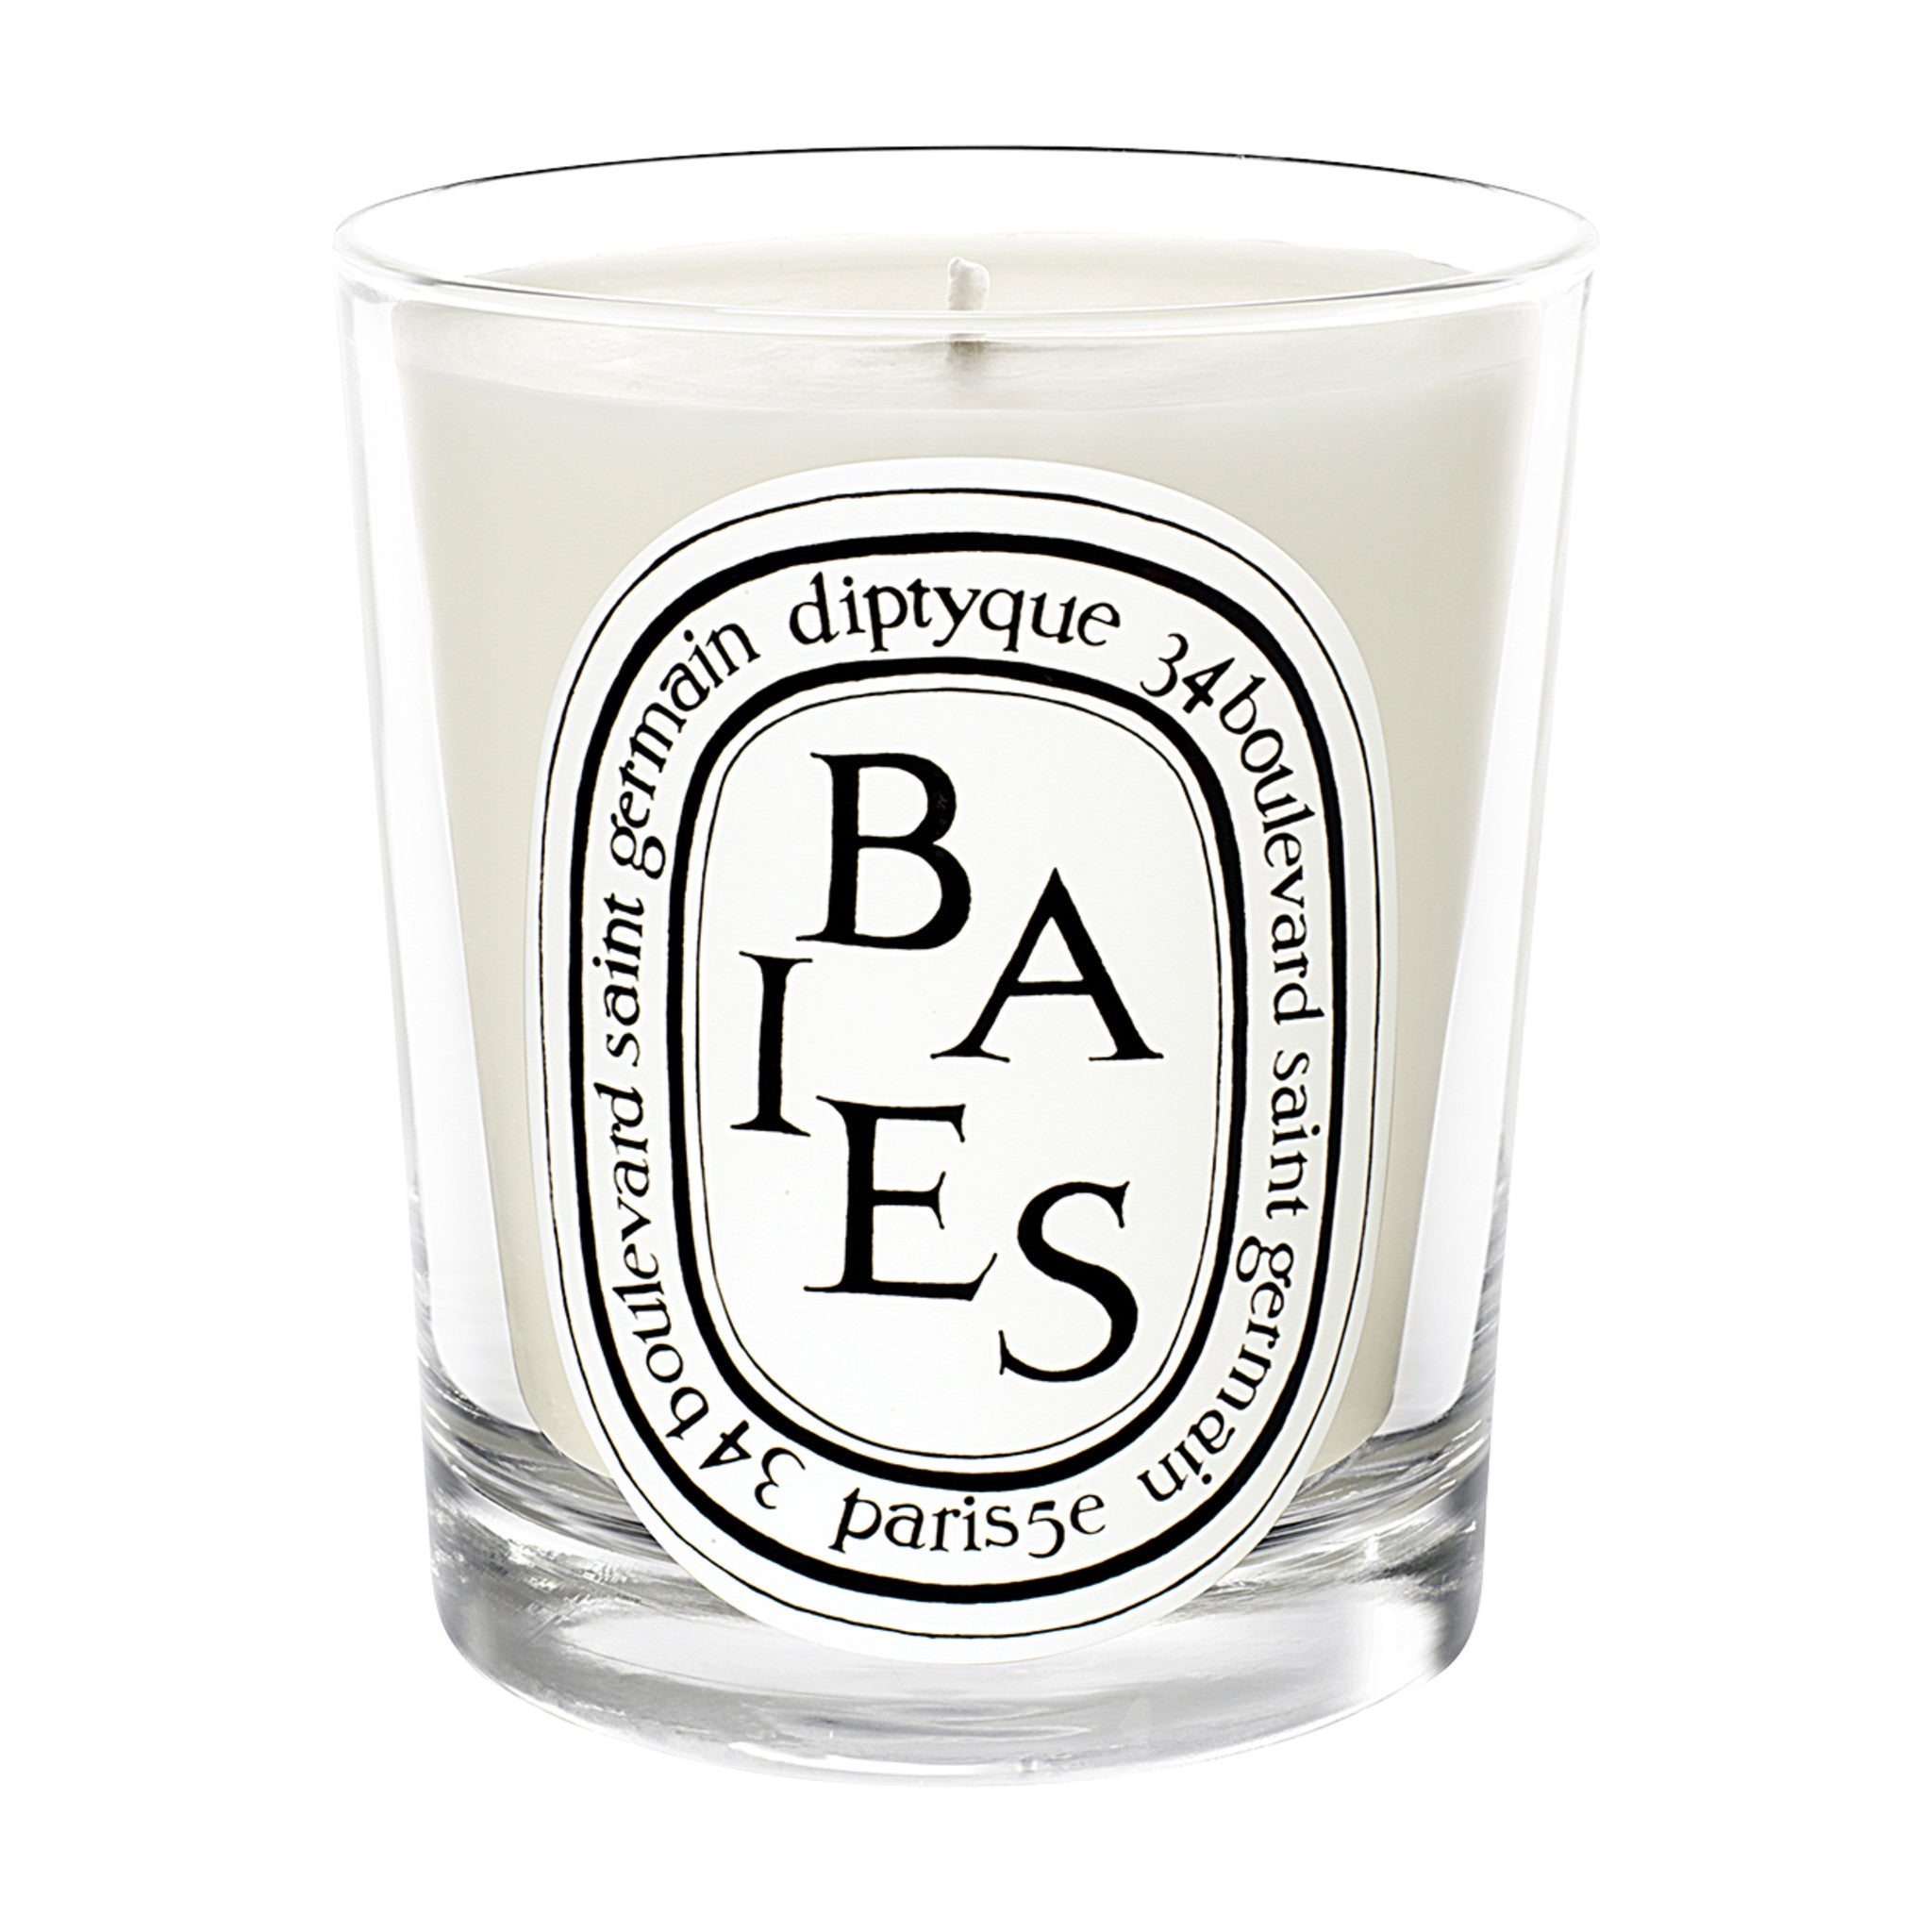 Diptyque Baies Candle 6.7 oz main image.